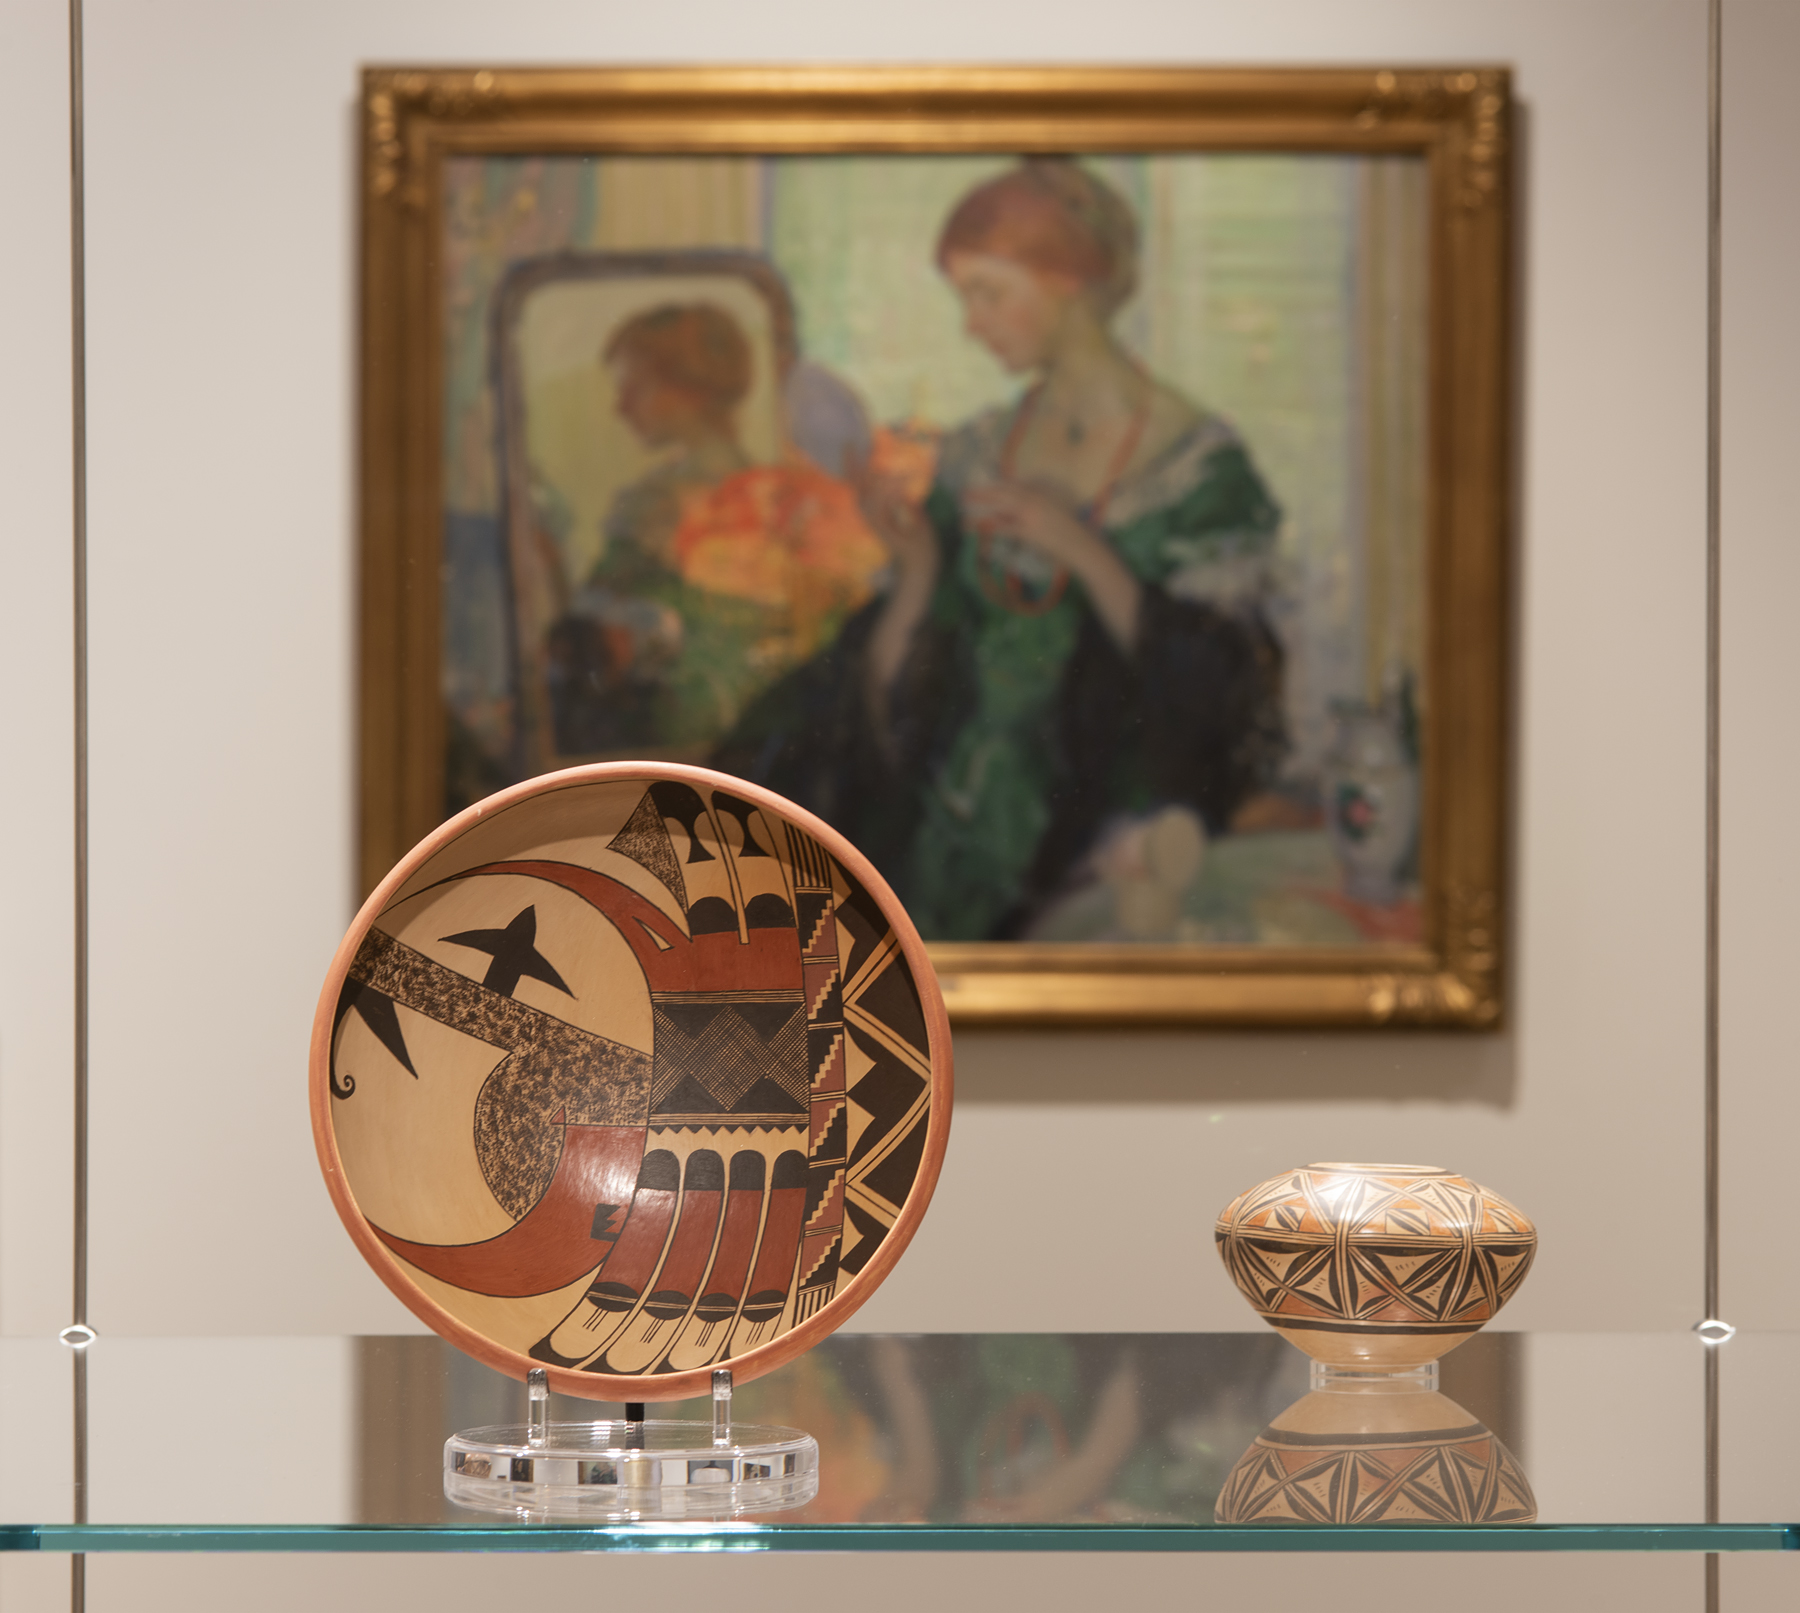 Two small ceramic objects sit on a glass shelf with a painting visible in the background